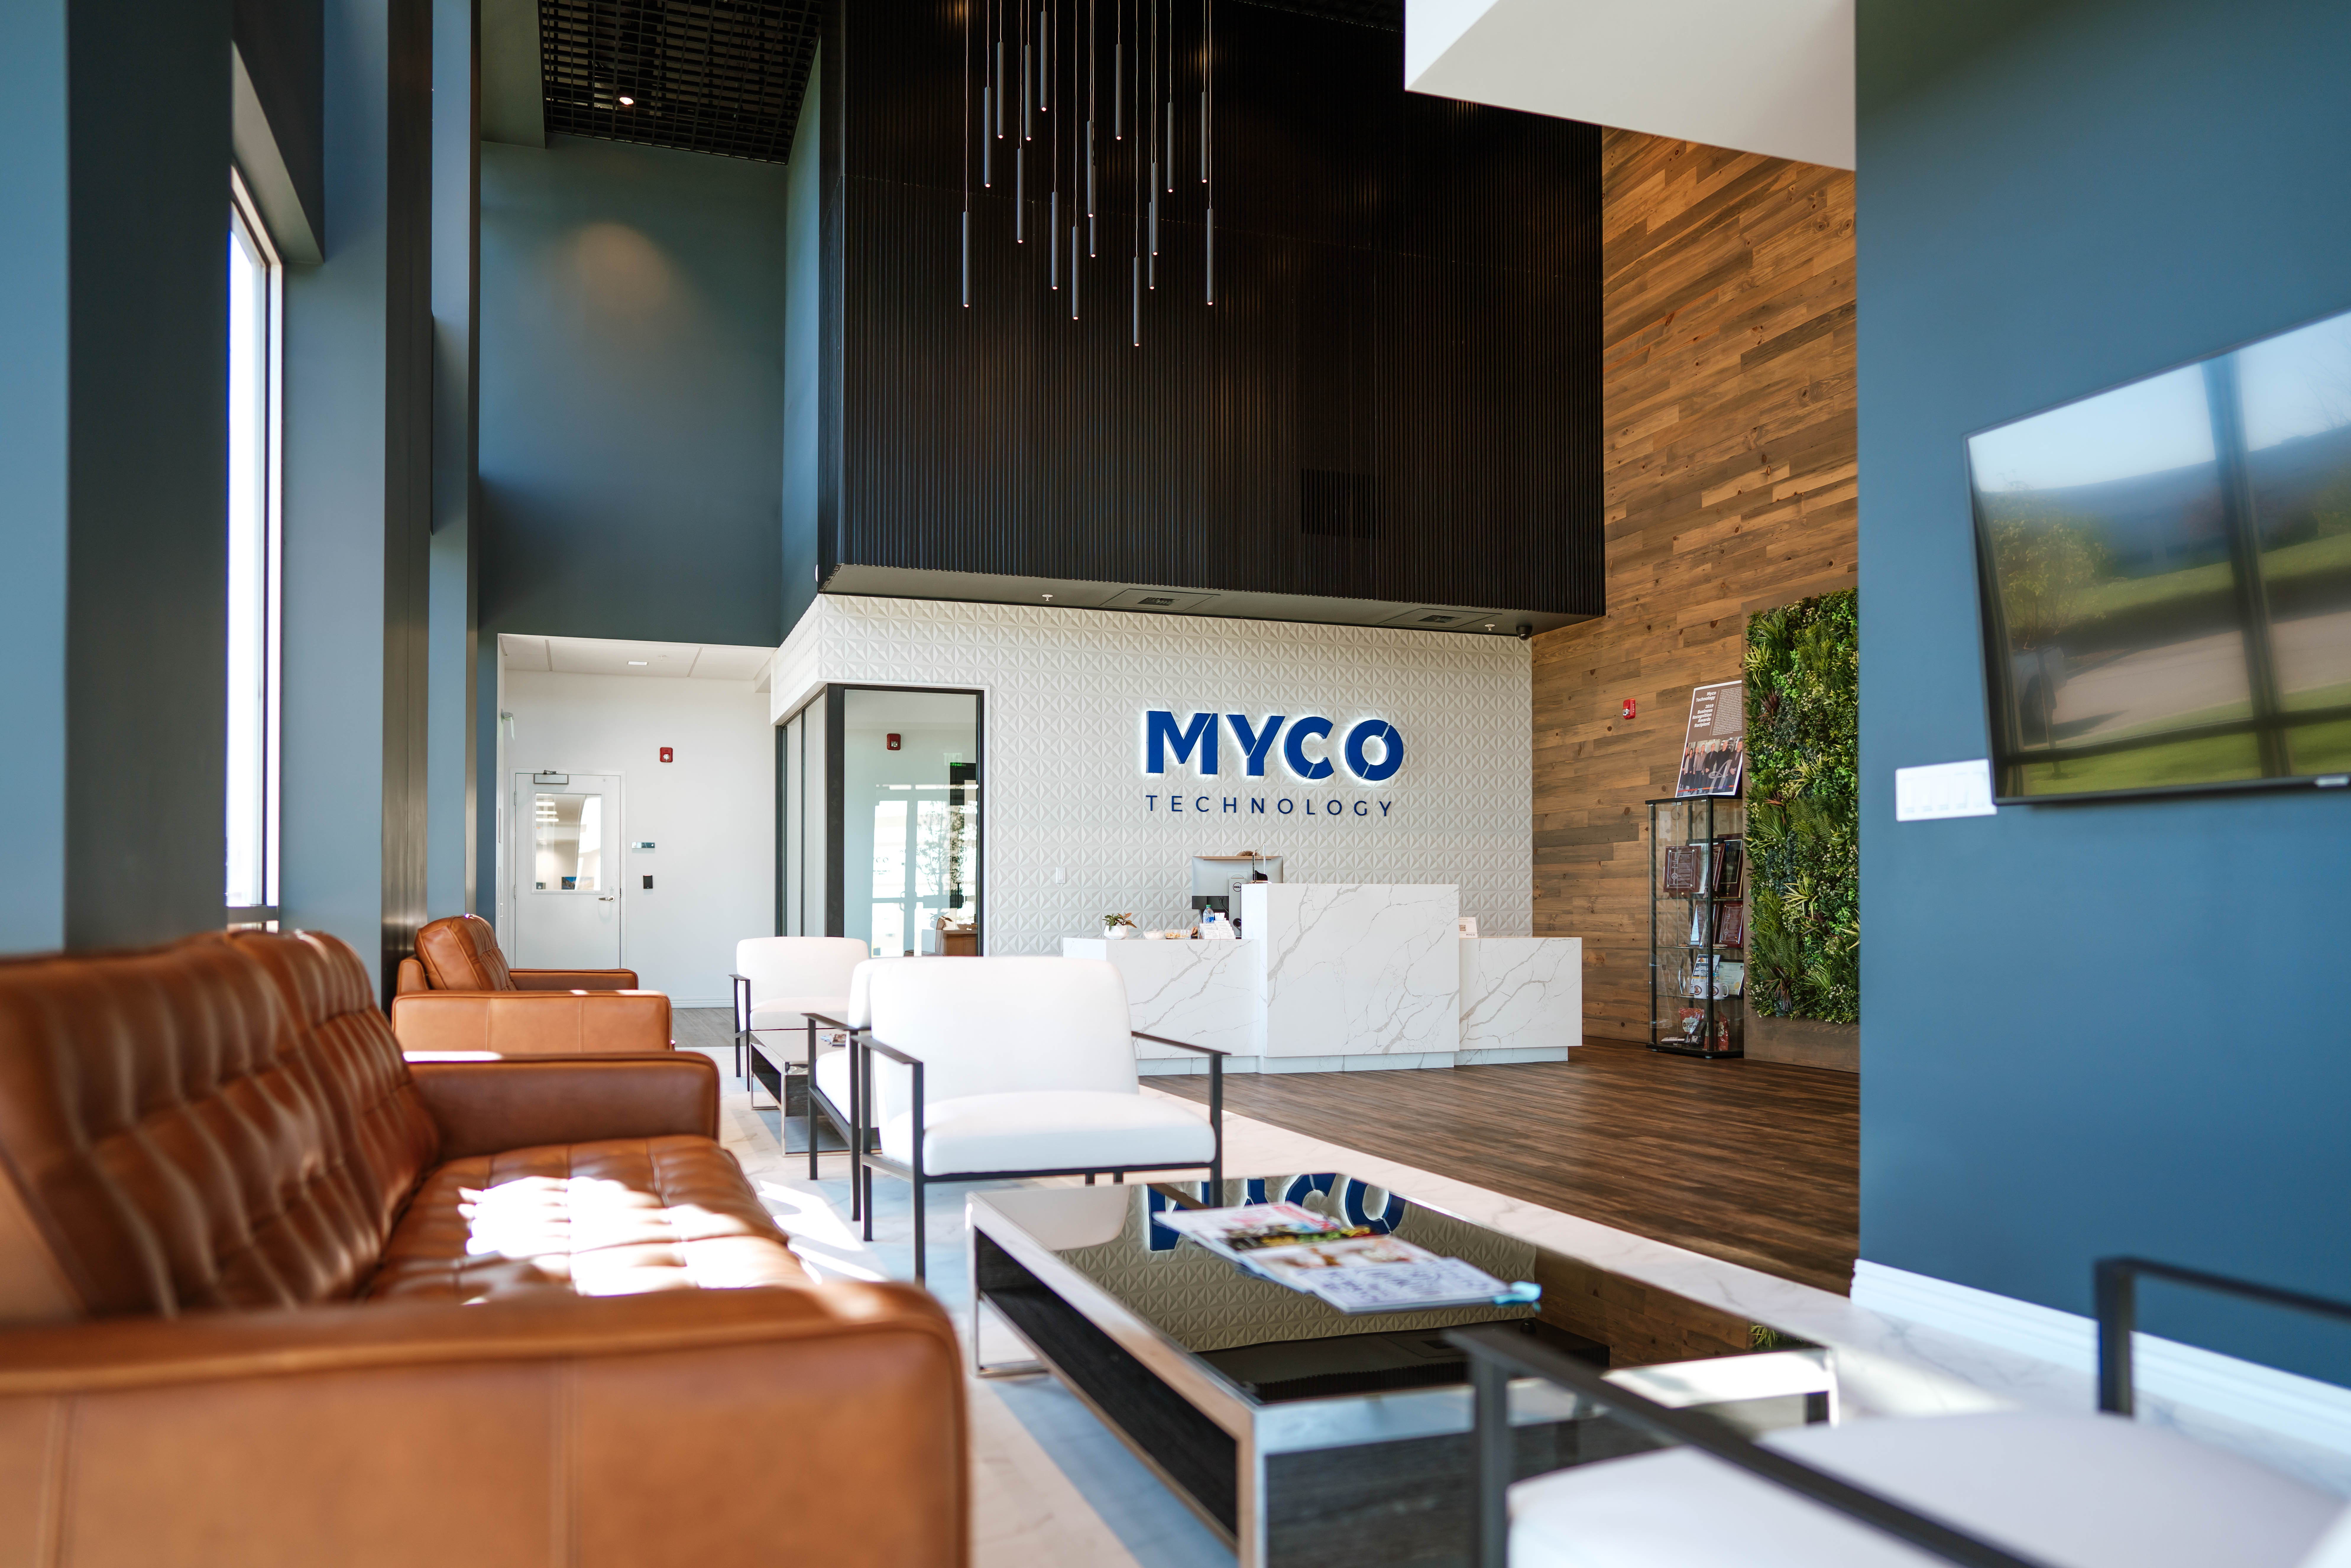 MycoTechnology has an established legacy of discovery and commercial success